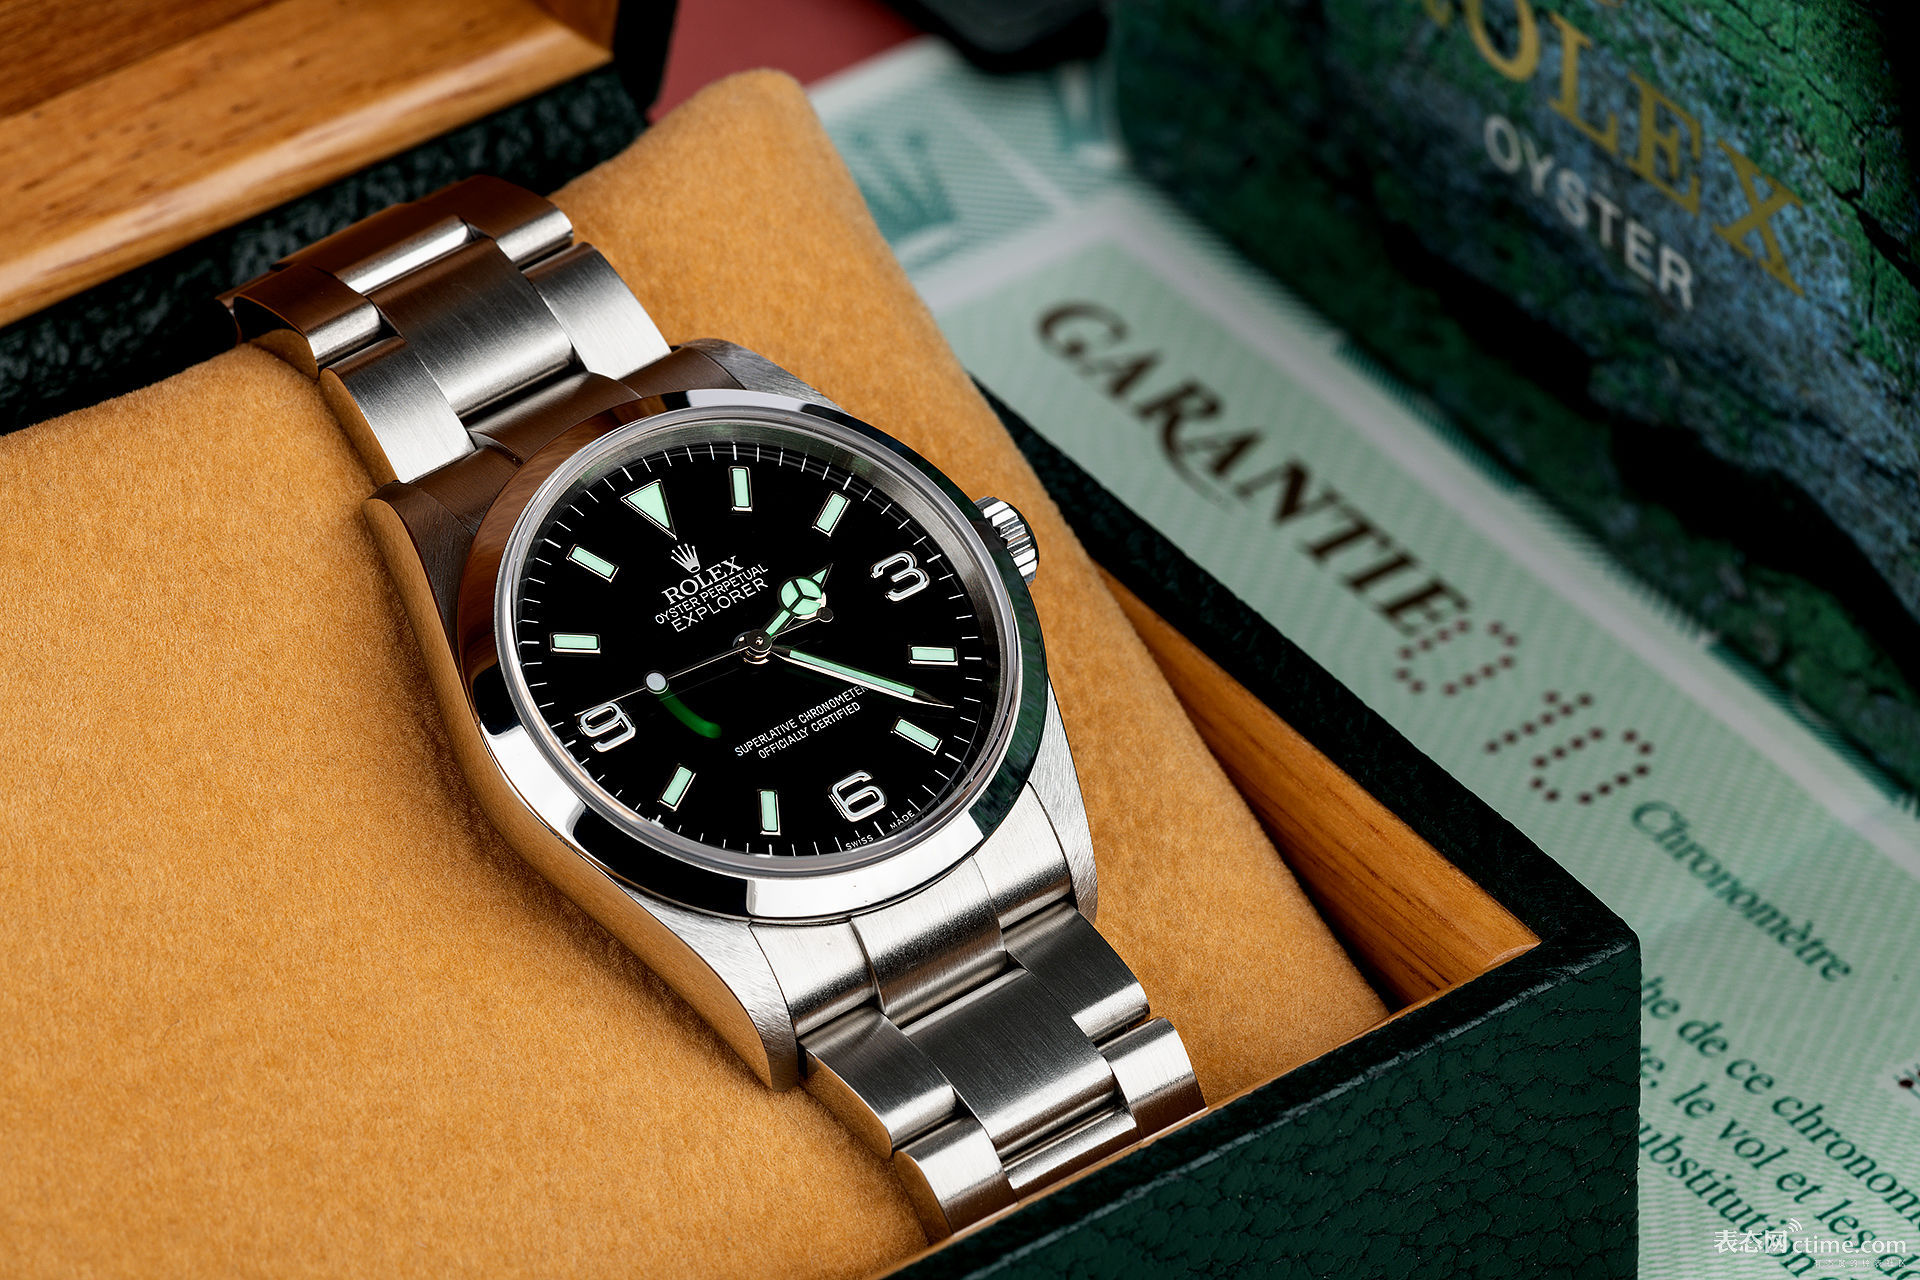 watch-club-rolex-explorer-new-vintage-box-and-papers-ref-114270-year-2001-6300-5.jpg